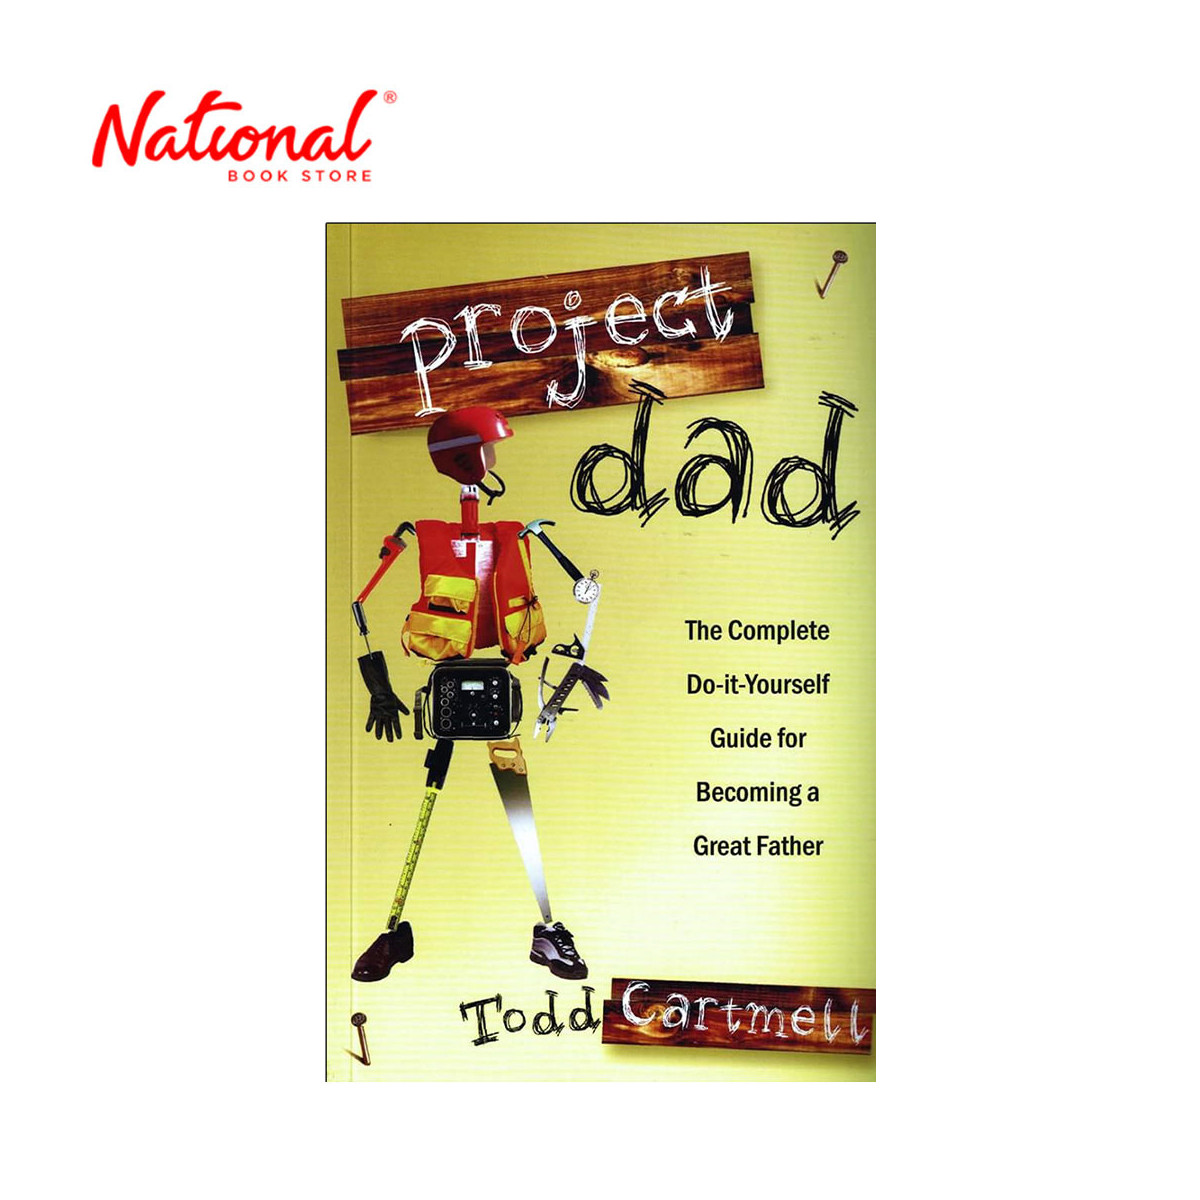 Project Dad by Todd Cartmell - Trade Paperback - Lifestyle - Parenting